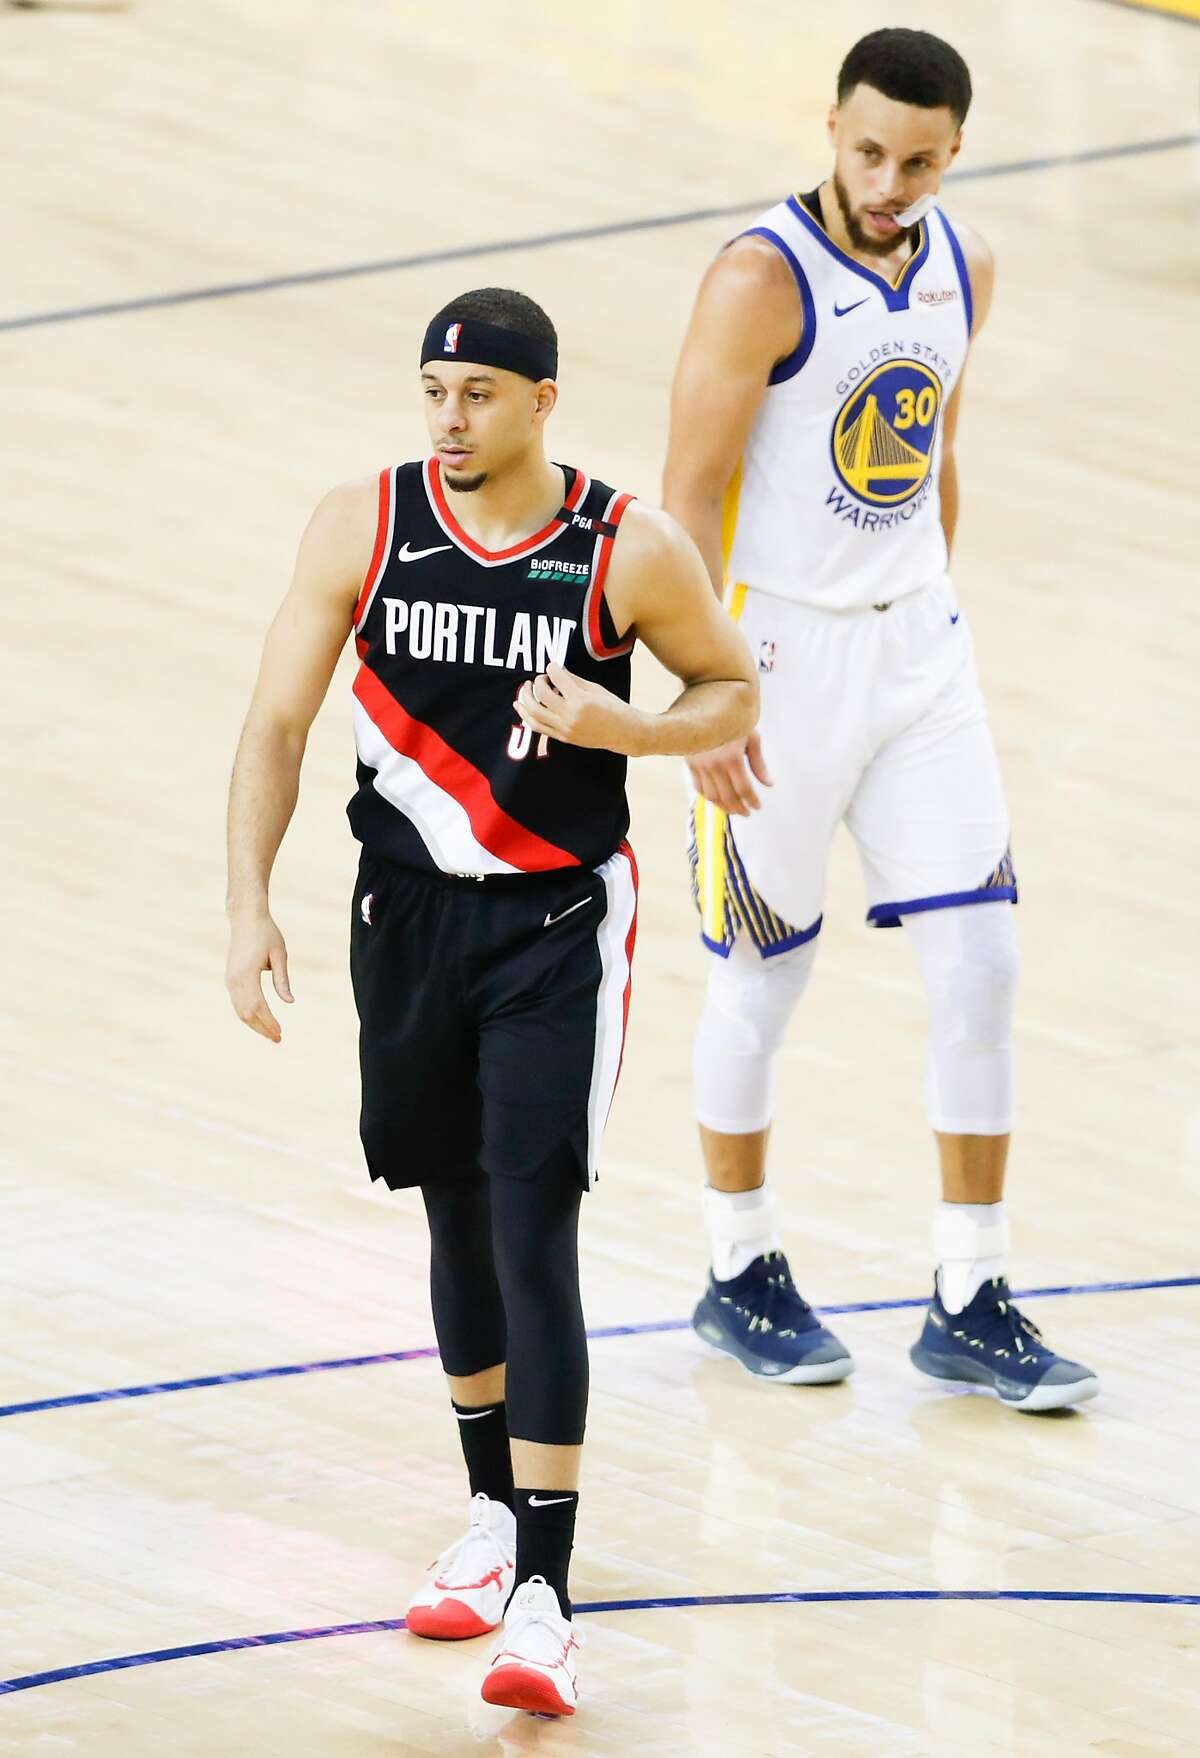 Dell and Sonya Curry switch split jerseys after Steph asks, 'Who you with?